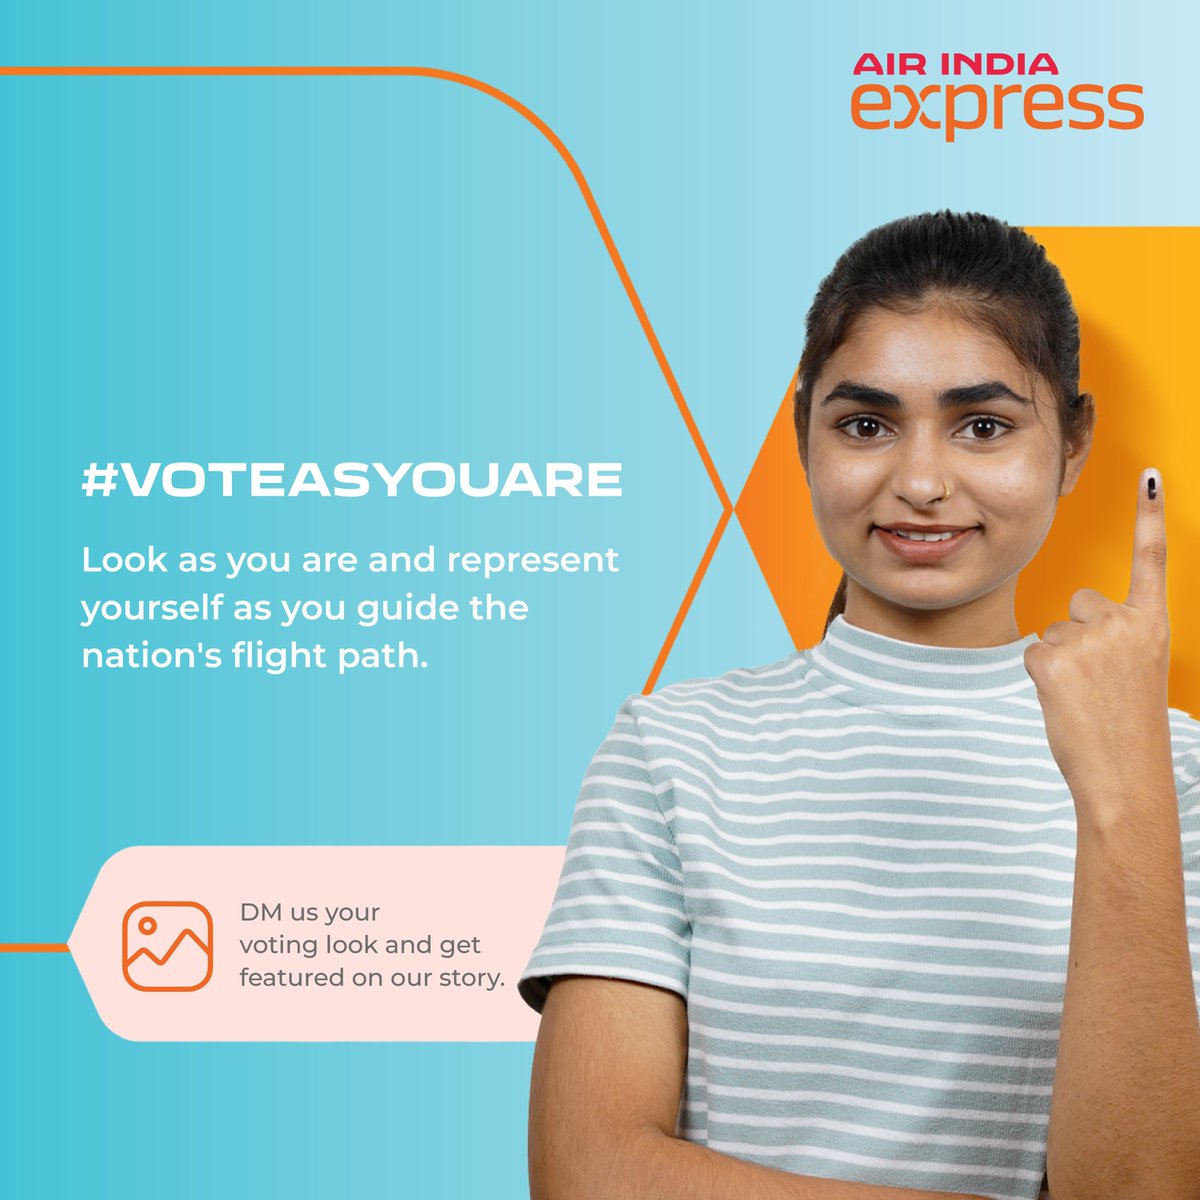 This Election Day, as you guide our nation’s future at the ballot station, vote to represent yourself, as you are! DM us your #VotingLook, tag @AirindiaX, #VoteAsYouAre and get featured!